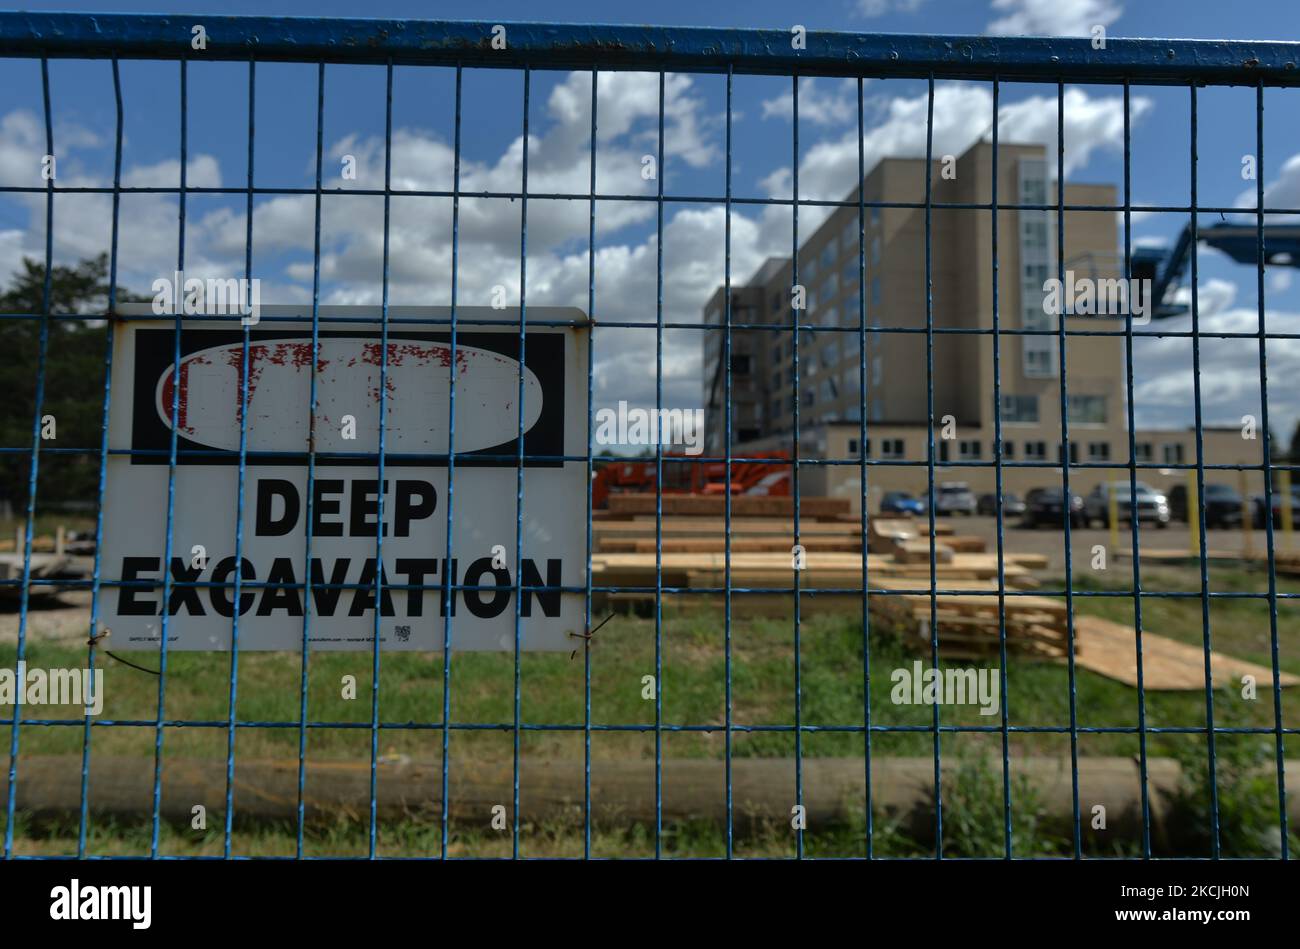 Deep Excavation sign attached to the fence surrounding the grounds of the former Charles Camsell Hospital in North Edmonton. First Nation members have been calling for construction to stop at the former Camsell Hospital where many believe patients may have been buried. Charles Camsell Hospital served as a hospital (1945-1996) for treating First Nations people with tuberculosis, but also a site where patients were subjected to research. On Wednesday, 11 August 2021, in Edmonton, Alberta, Canada. (Photo by Artur Widak/NurPhoto) Stock Photo